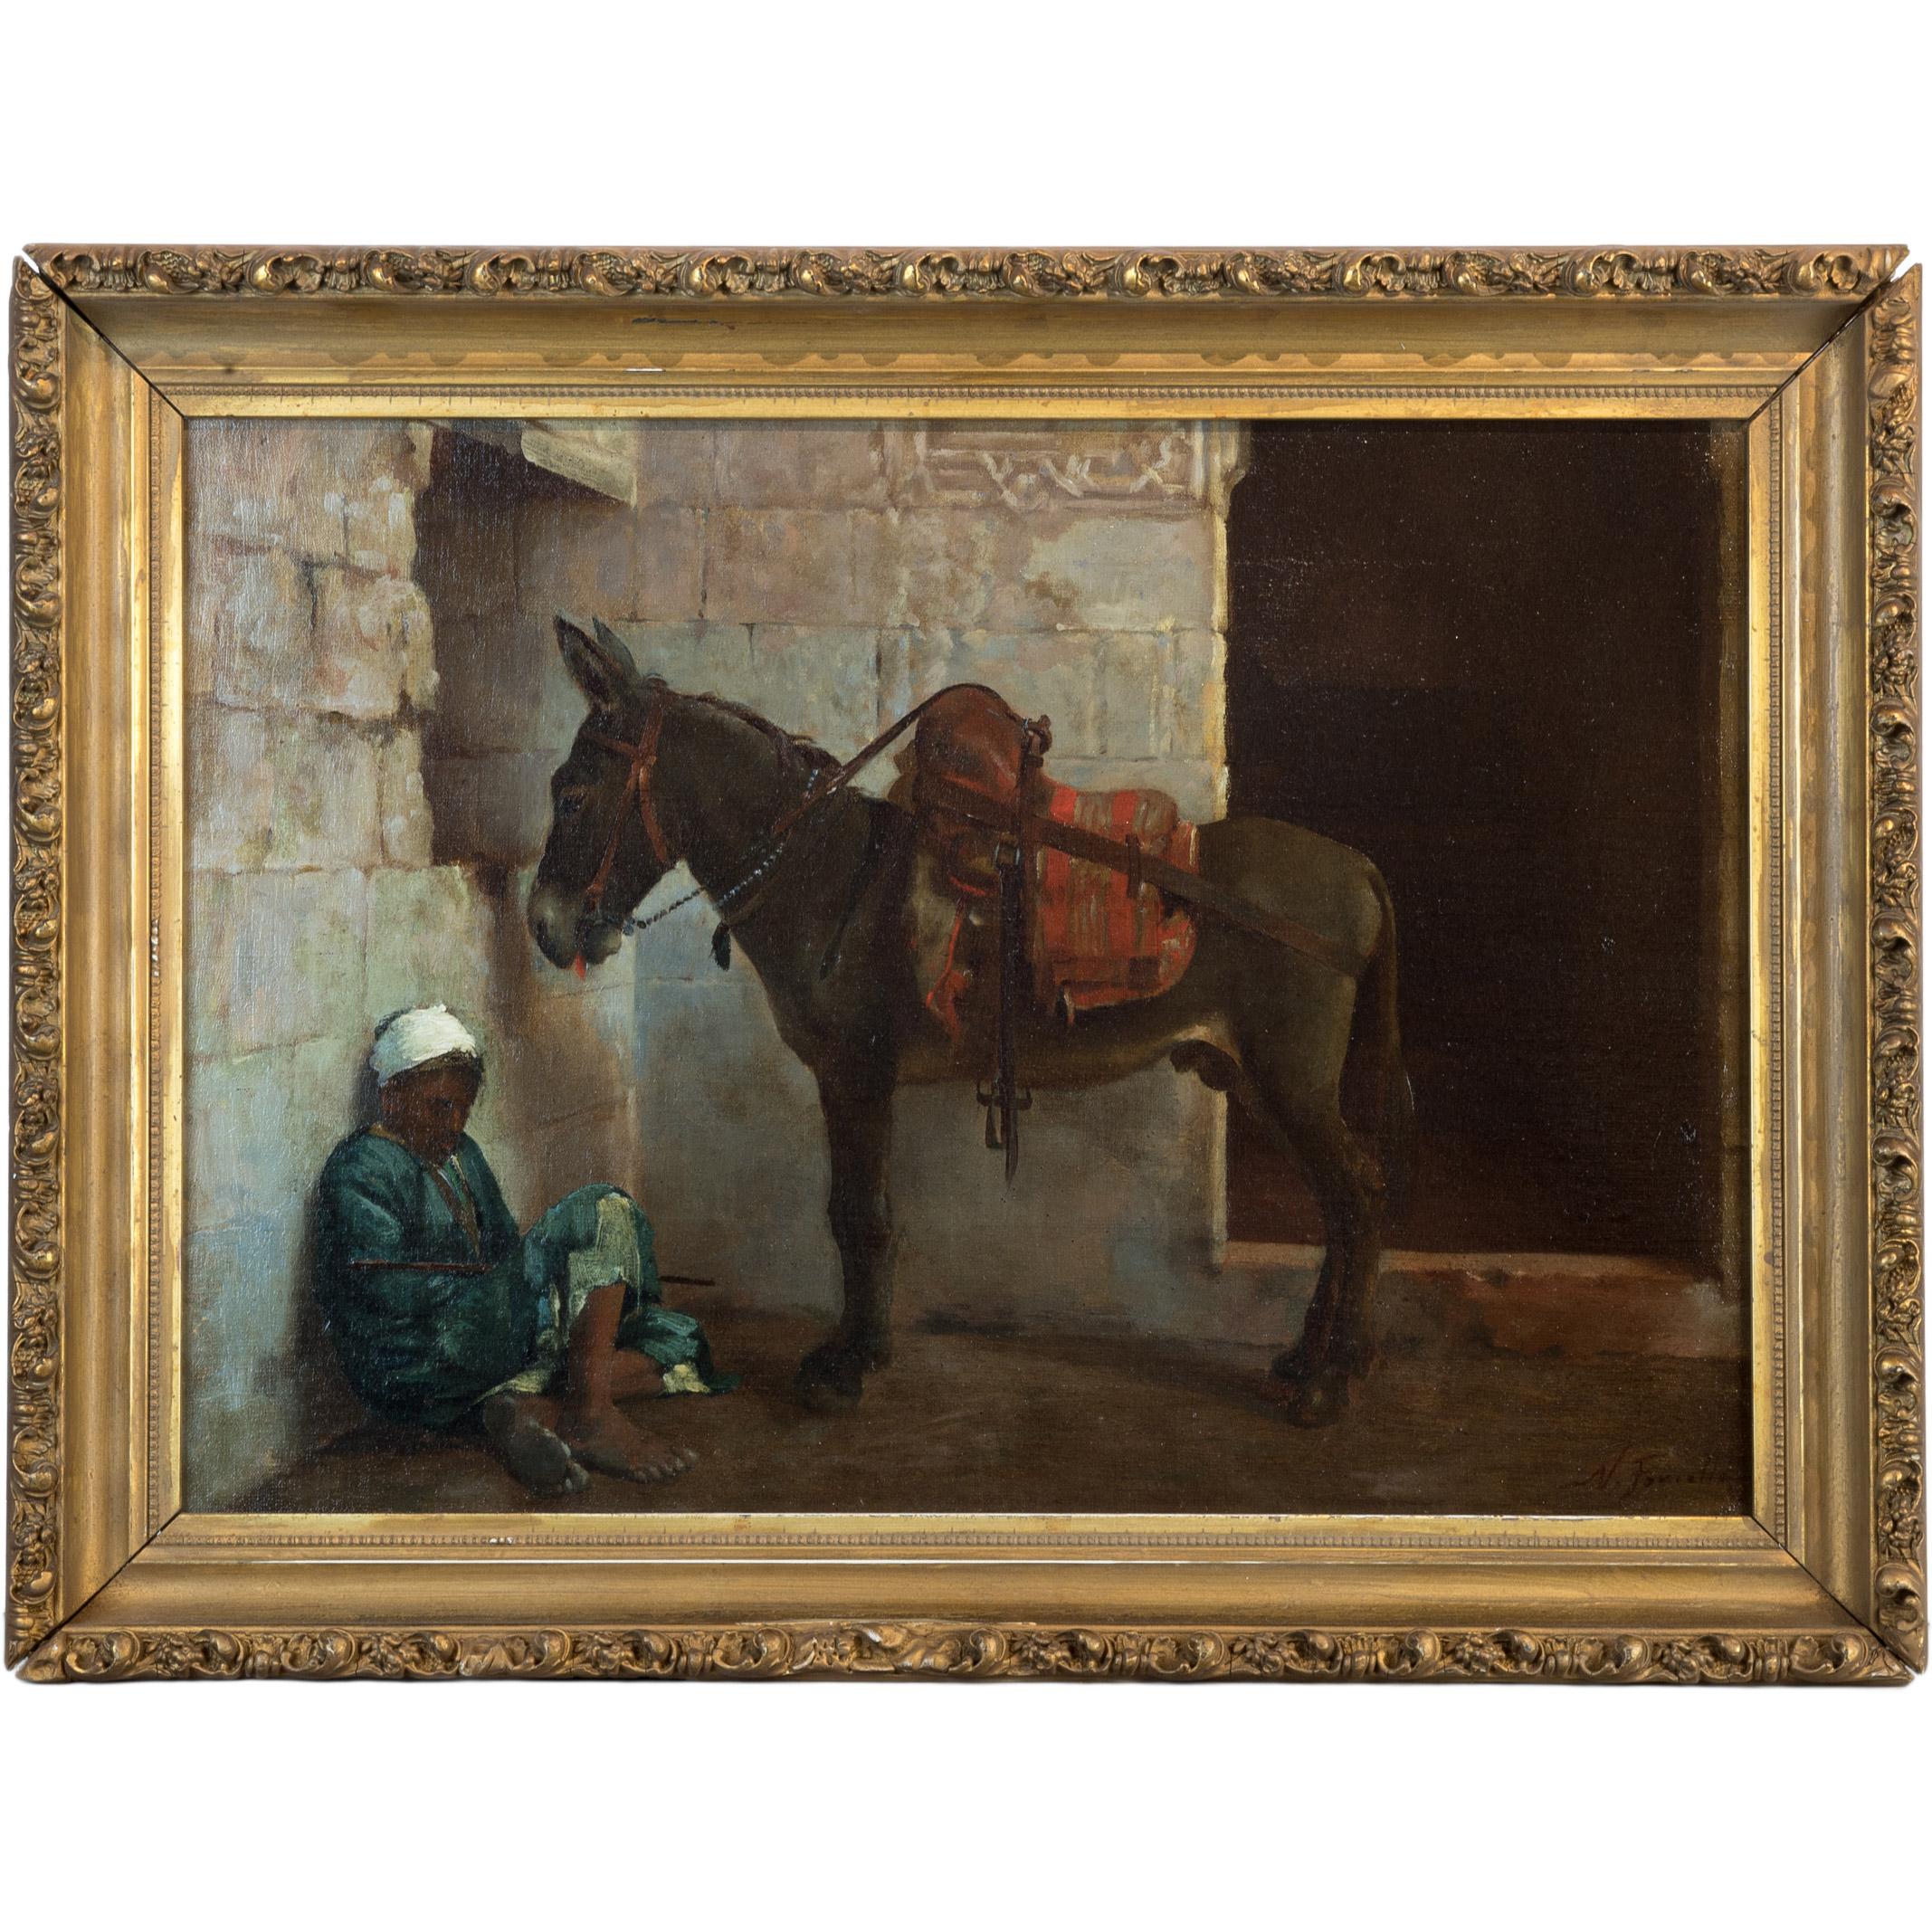 NICOLA FORCELLA 
Italian, (B.1868)

A Young Boy With Donkey

Medium: Oil on canvas
Signature: Signed LR
Dimension: 12 1/2 in. x 18 in.